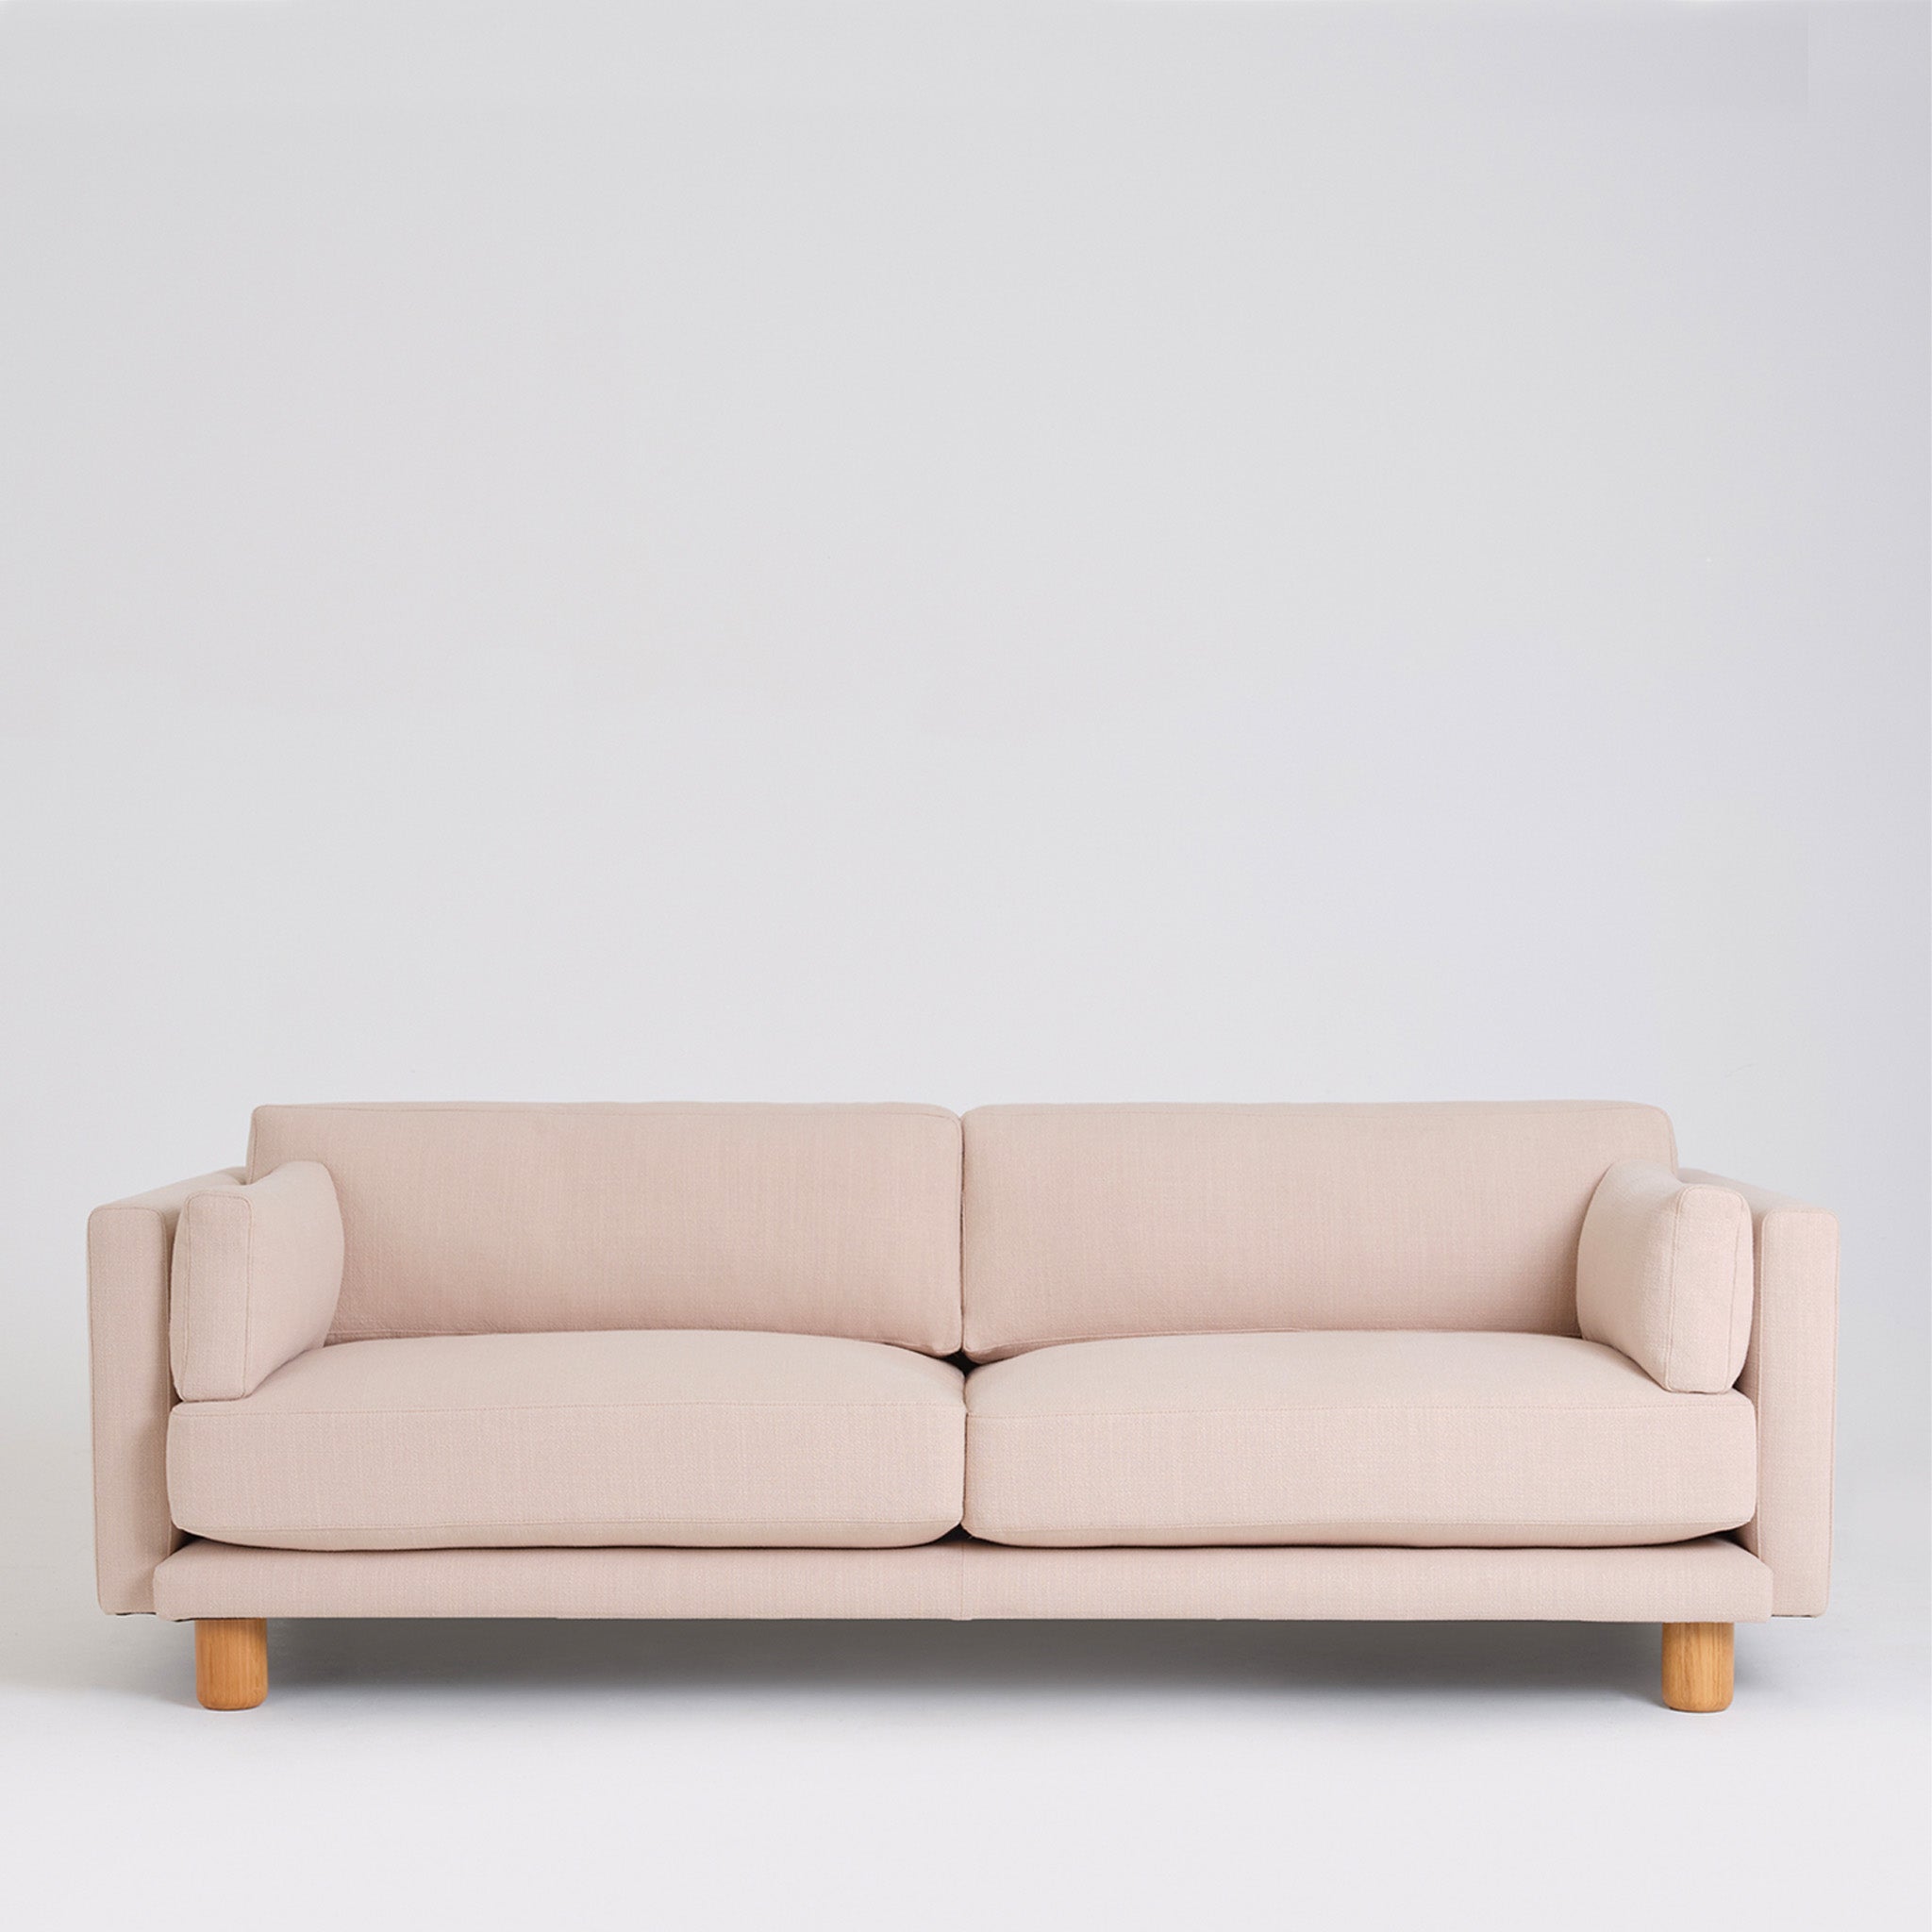 Welwyn Sofa by Another Country